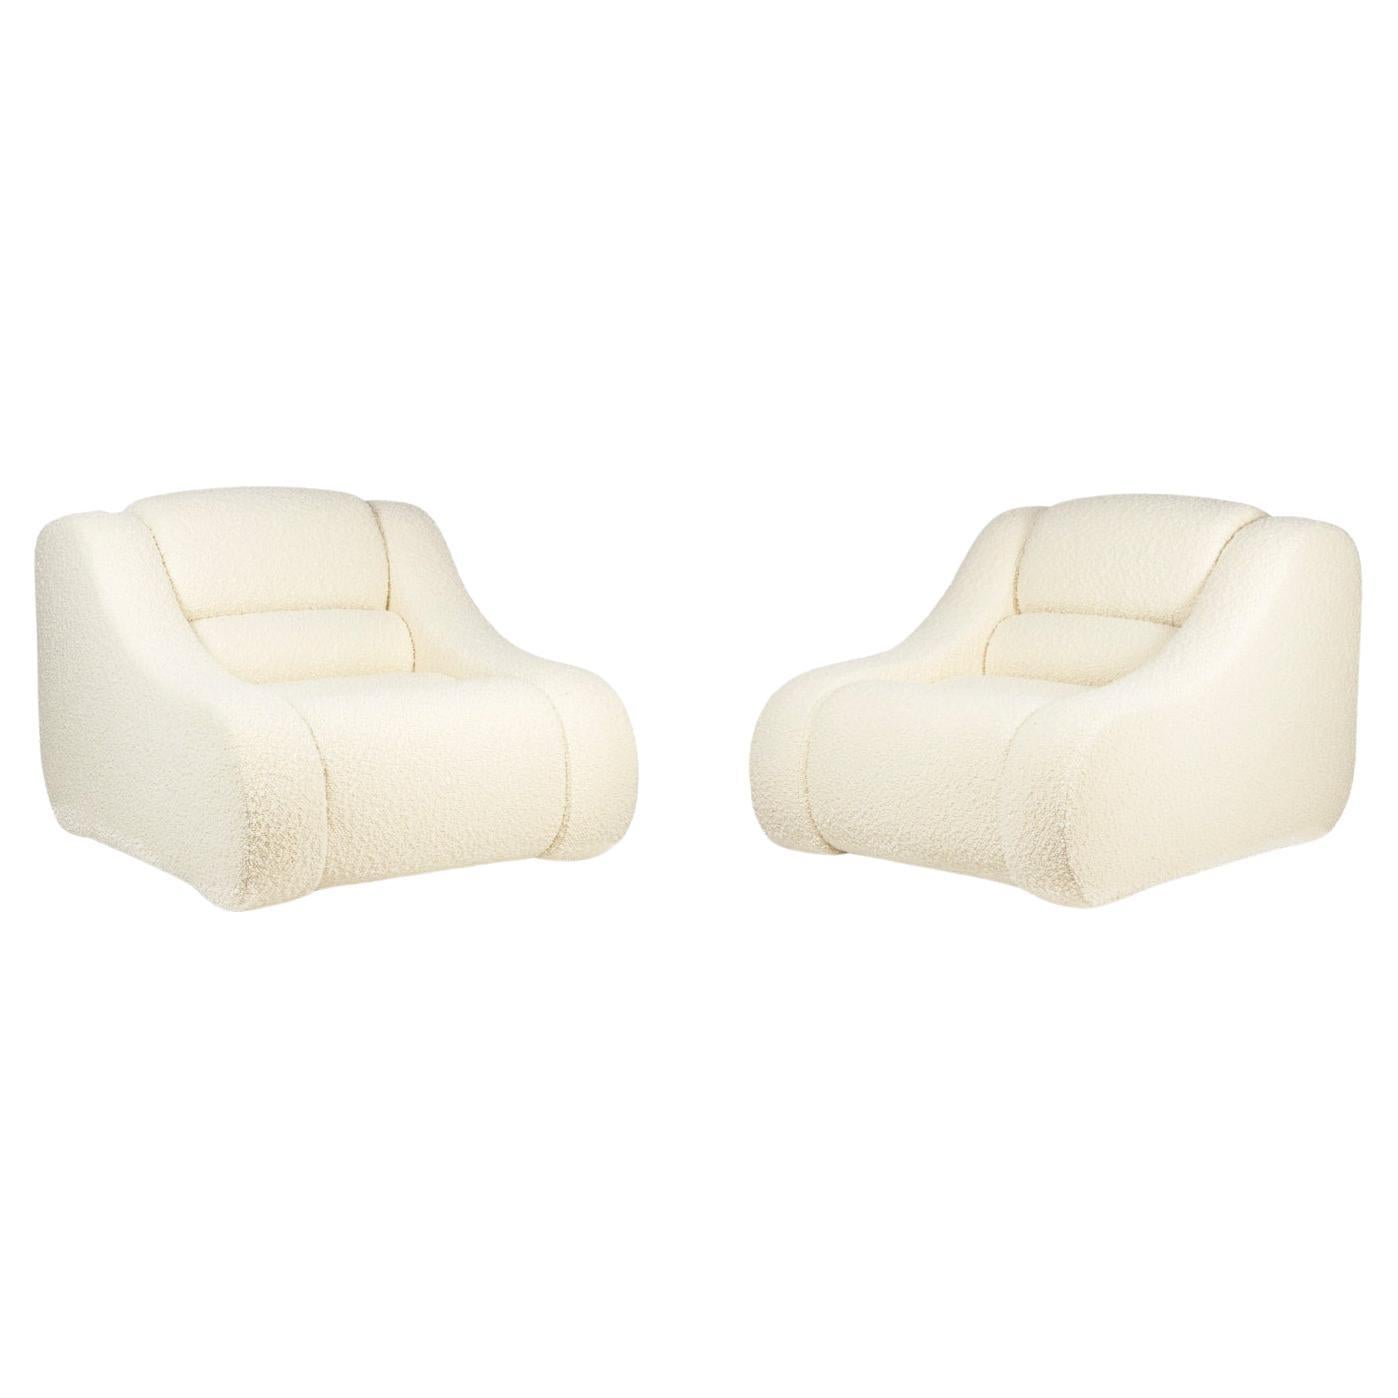 Pair of armchairs with fine curls. Contemporary work. For Sale